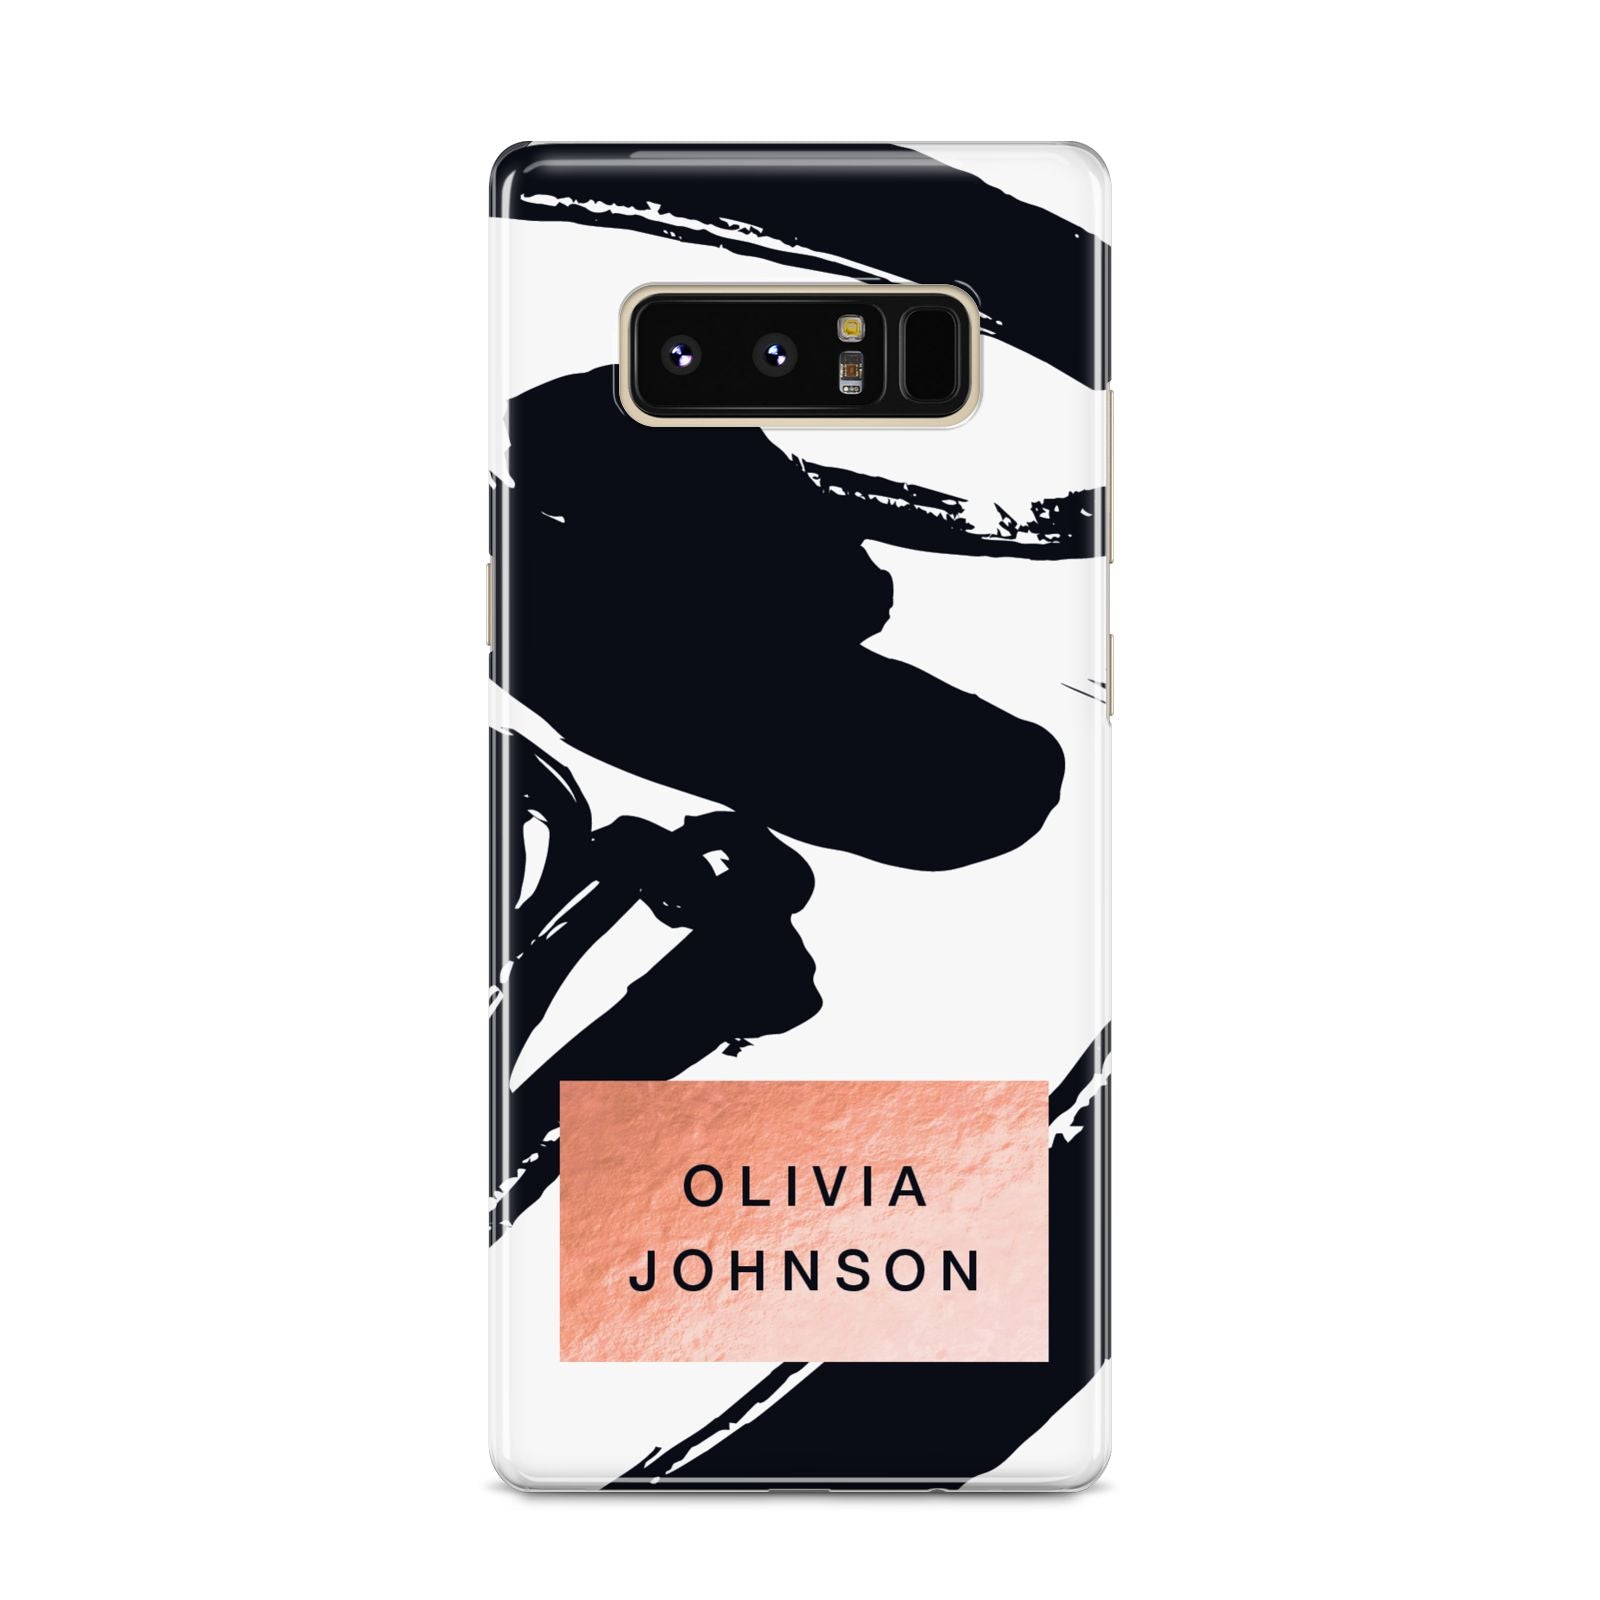 Personalised Black Brushes With Name Samsung Galaxy S8 Case